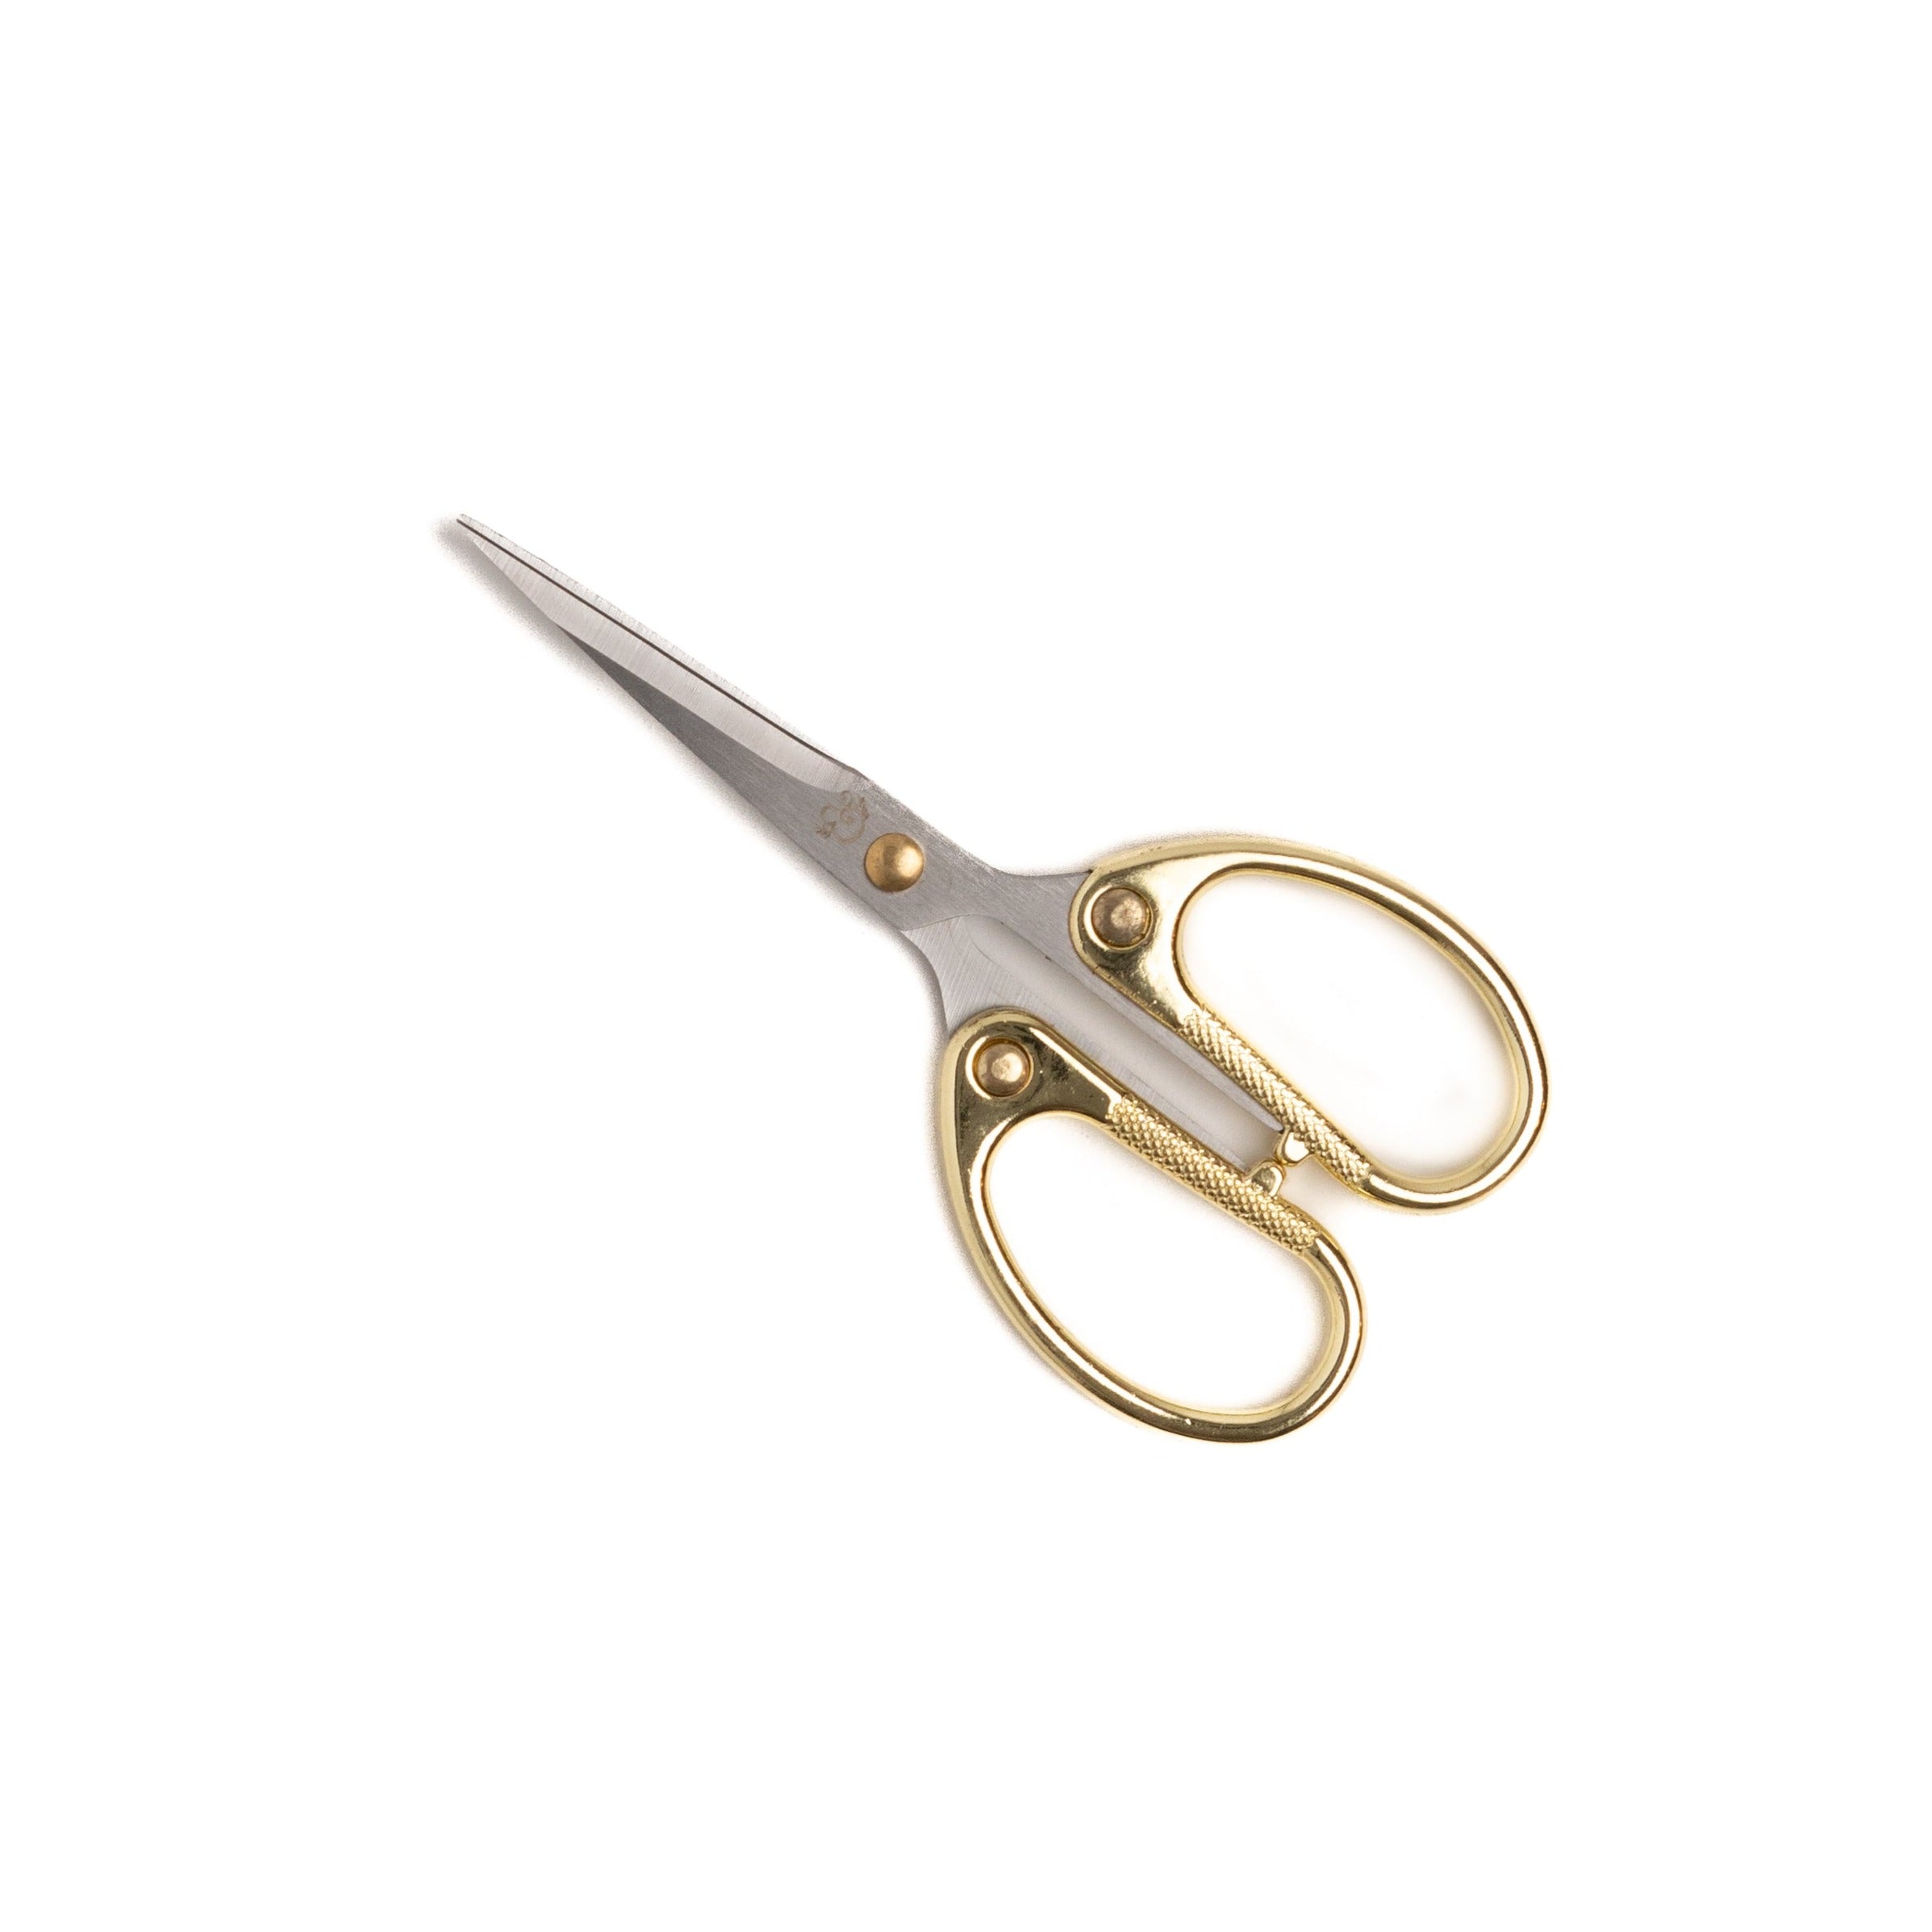 Everyday Stationery Scissors - Archer and Olive